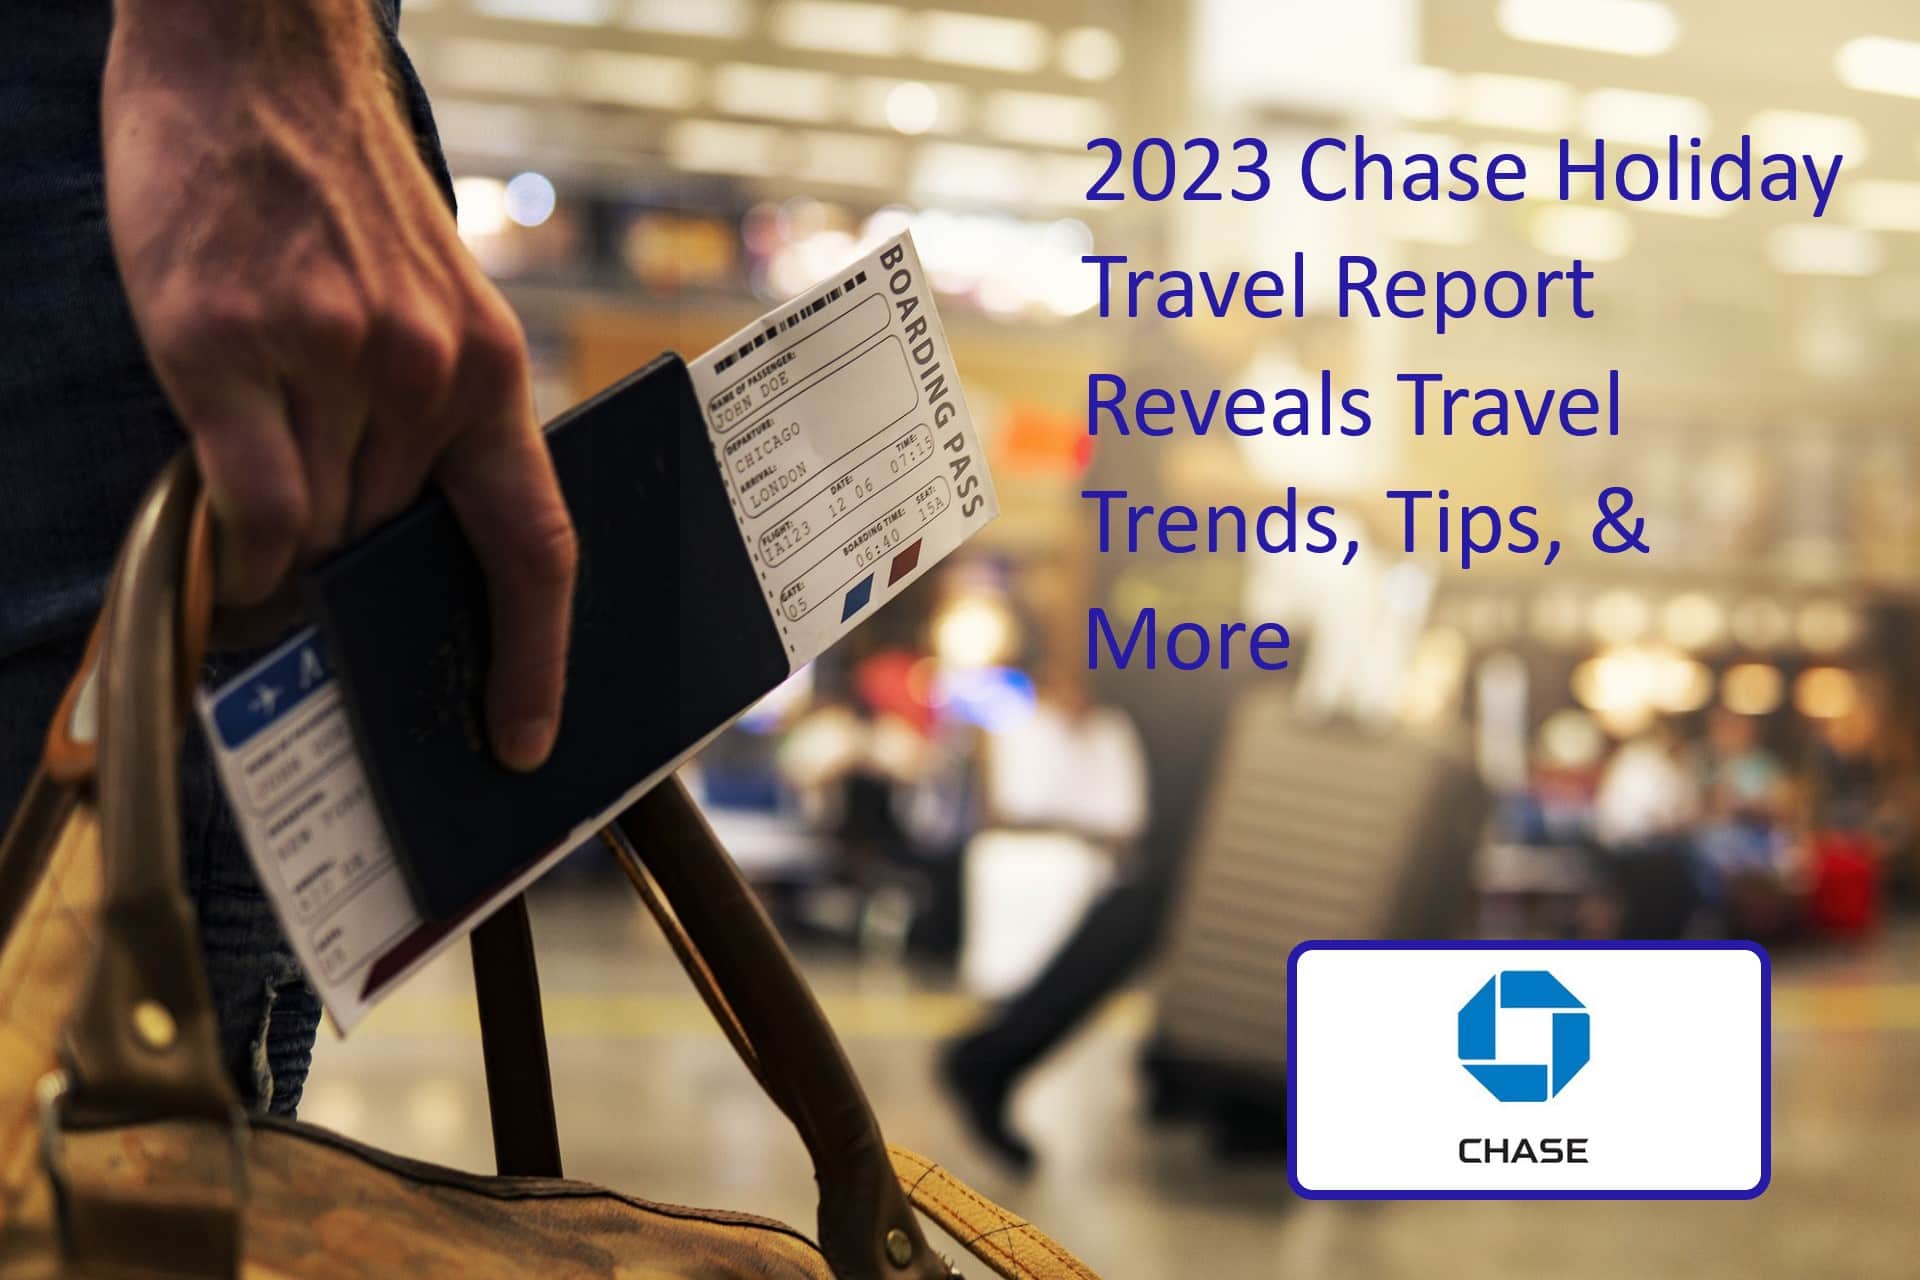 Chase Travel Holiday Travel 2023 Report BestCards.com